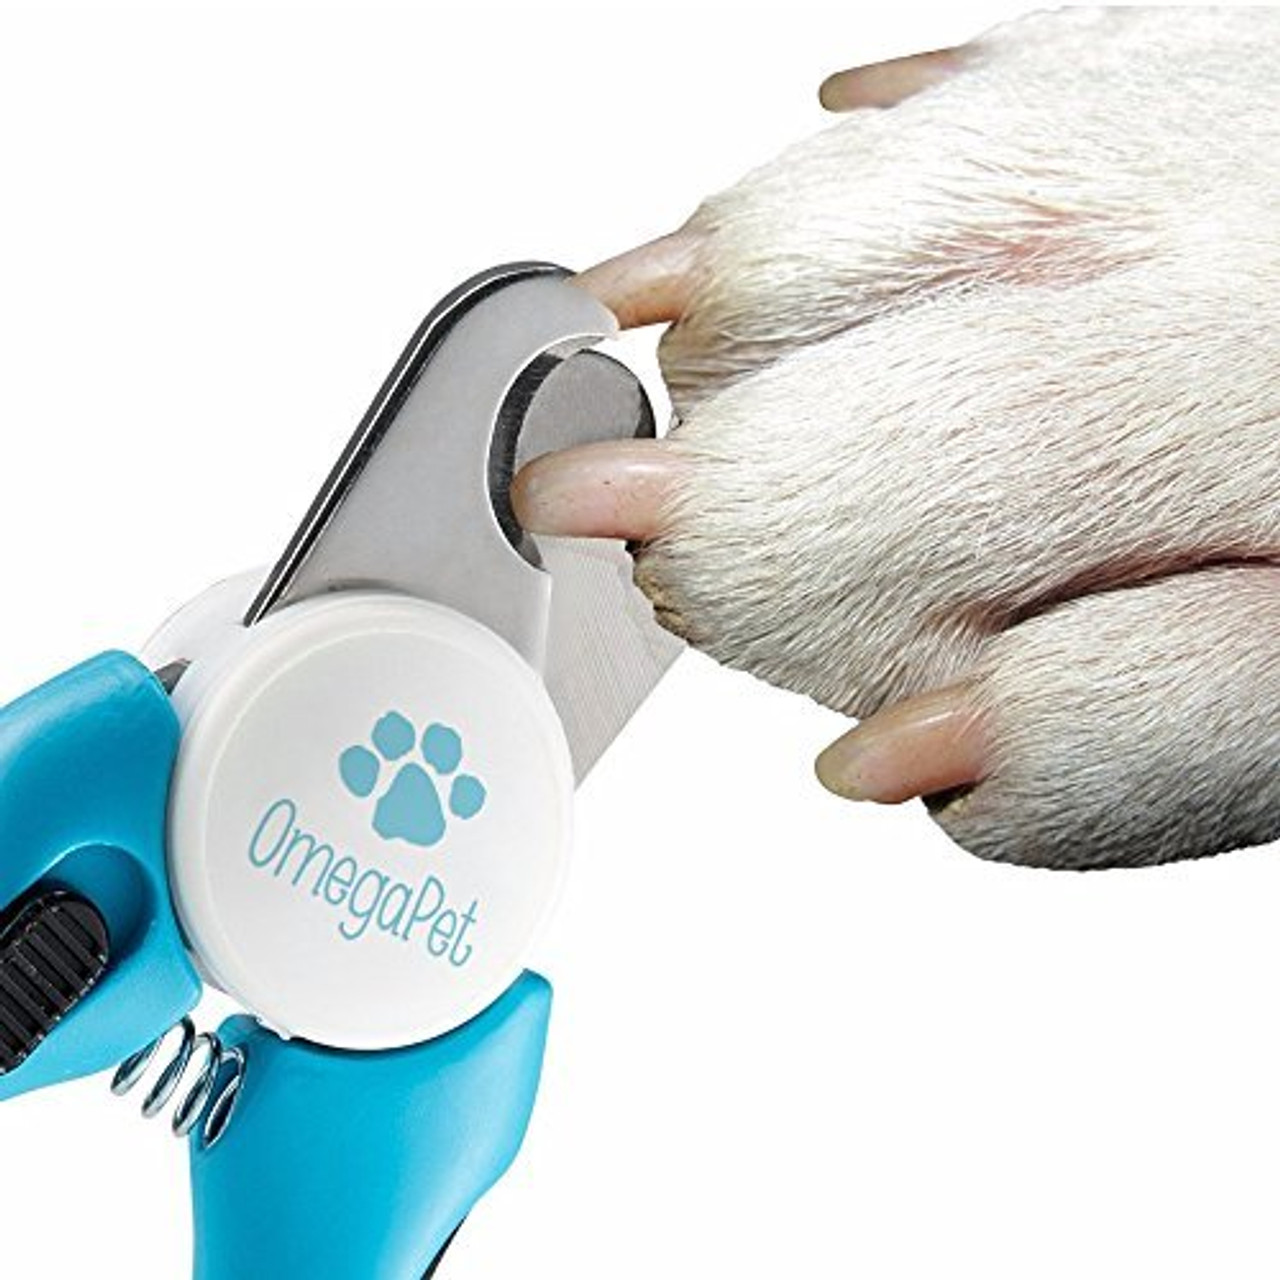 easy dog nail clippers